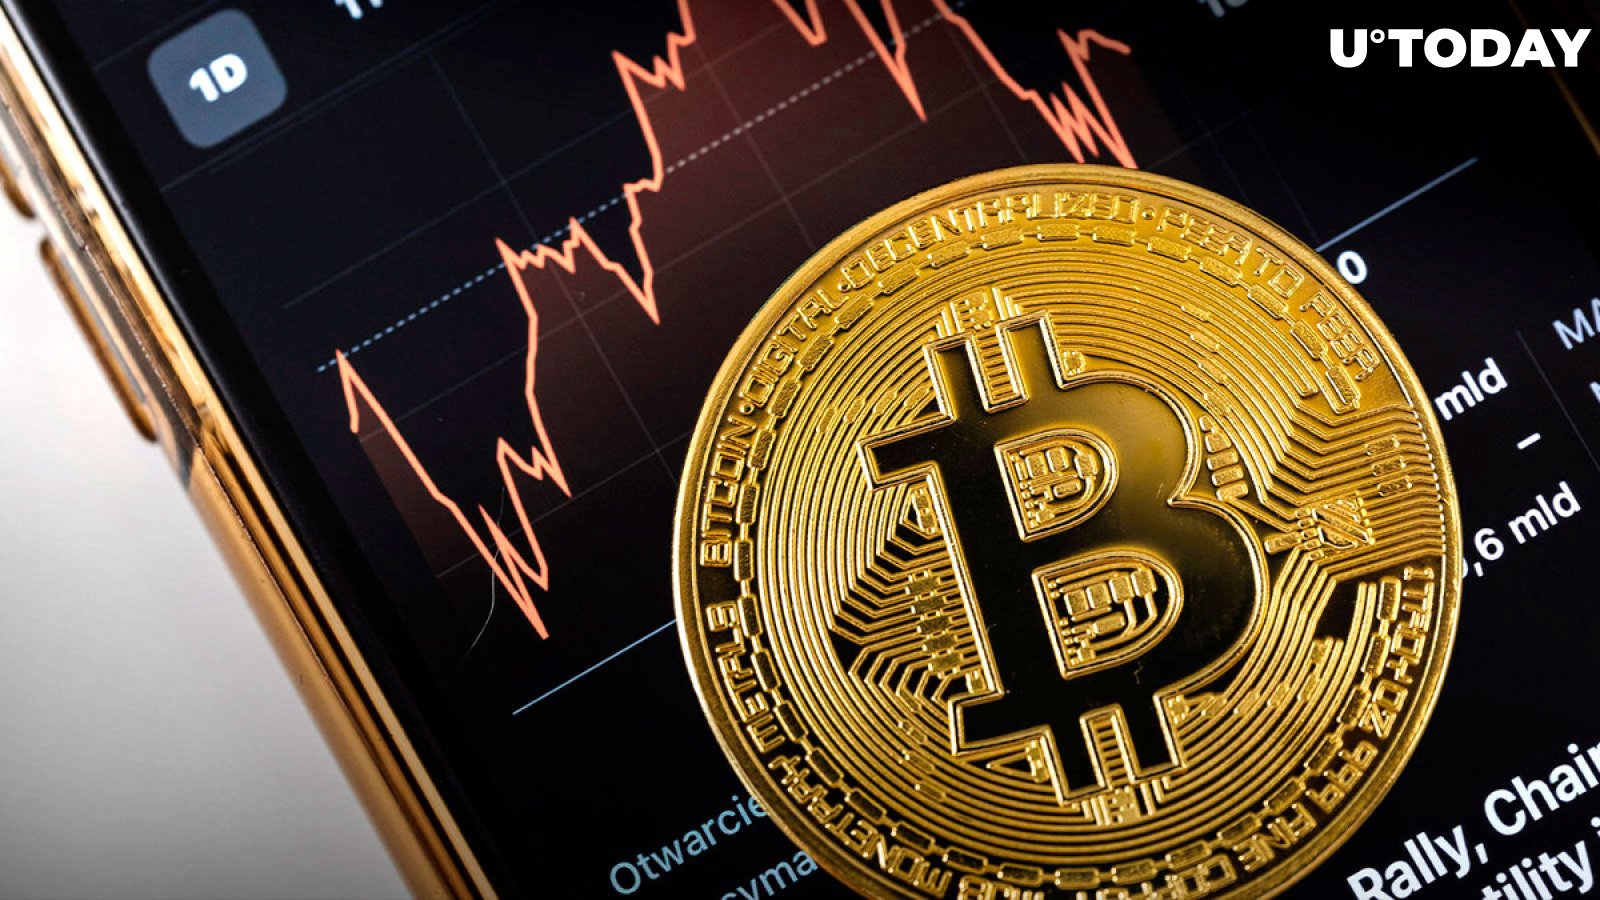 Top Analyst Predicts Bitcoin (BTC) Price to 0K Pre-Halving